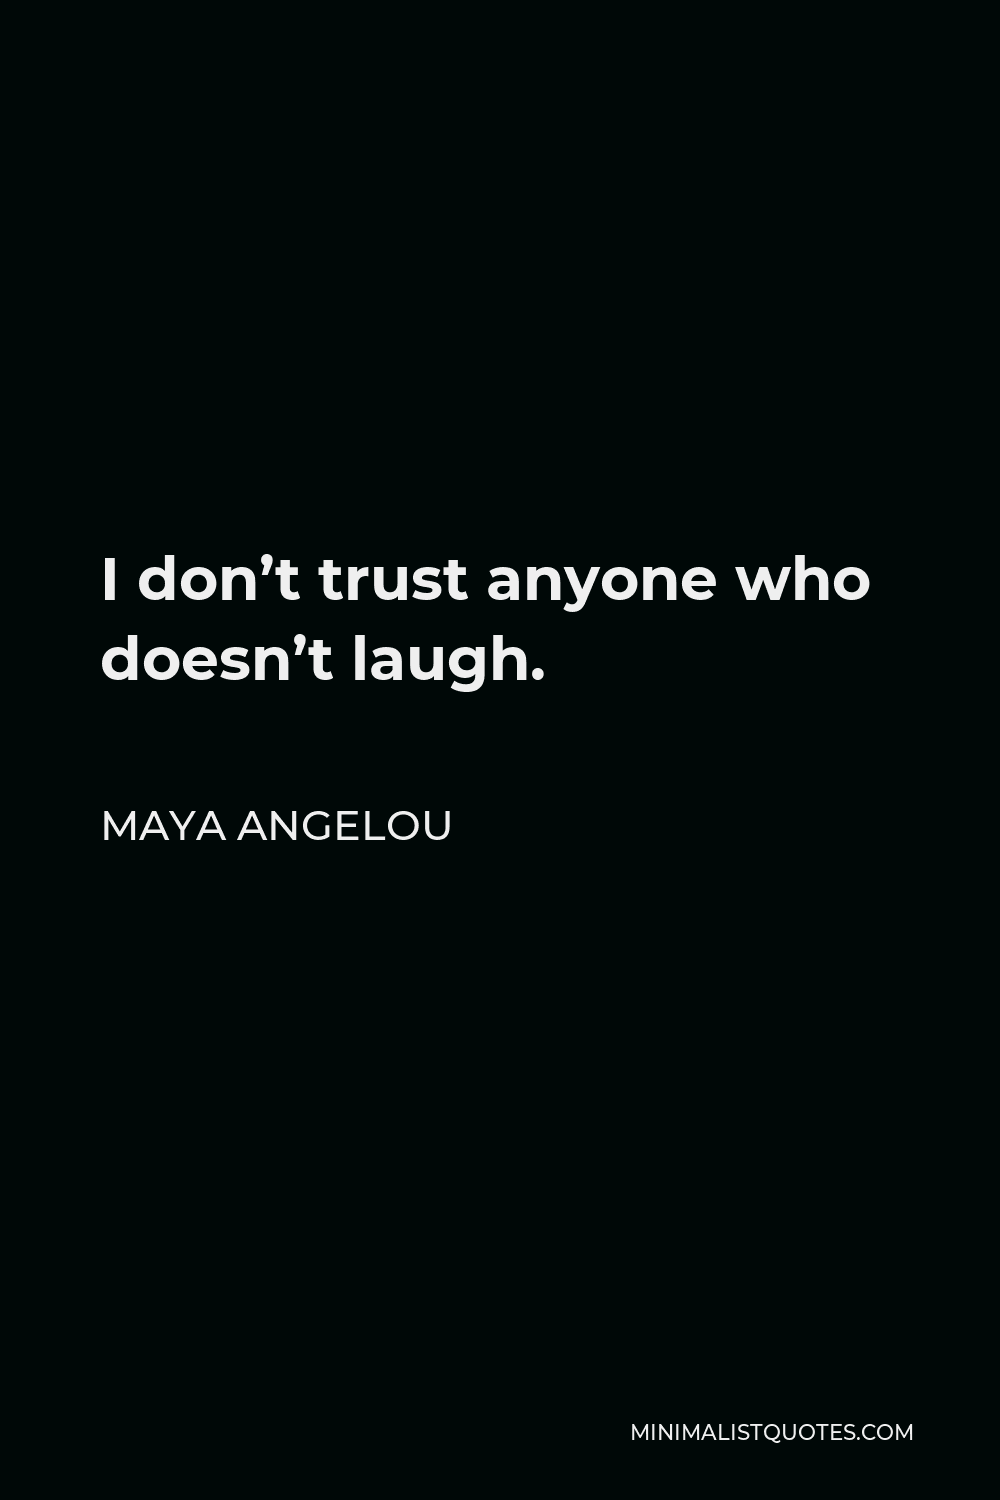 Maya Angelou Quote: I don't trust anyone who doesn't laugh.